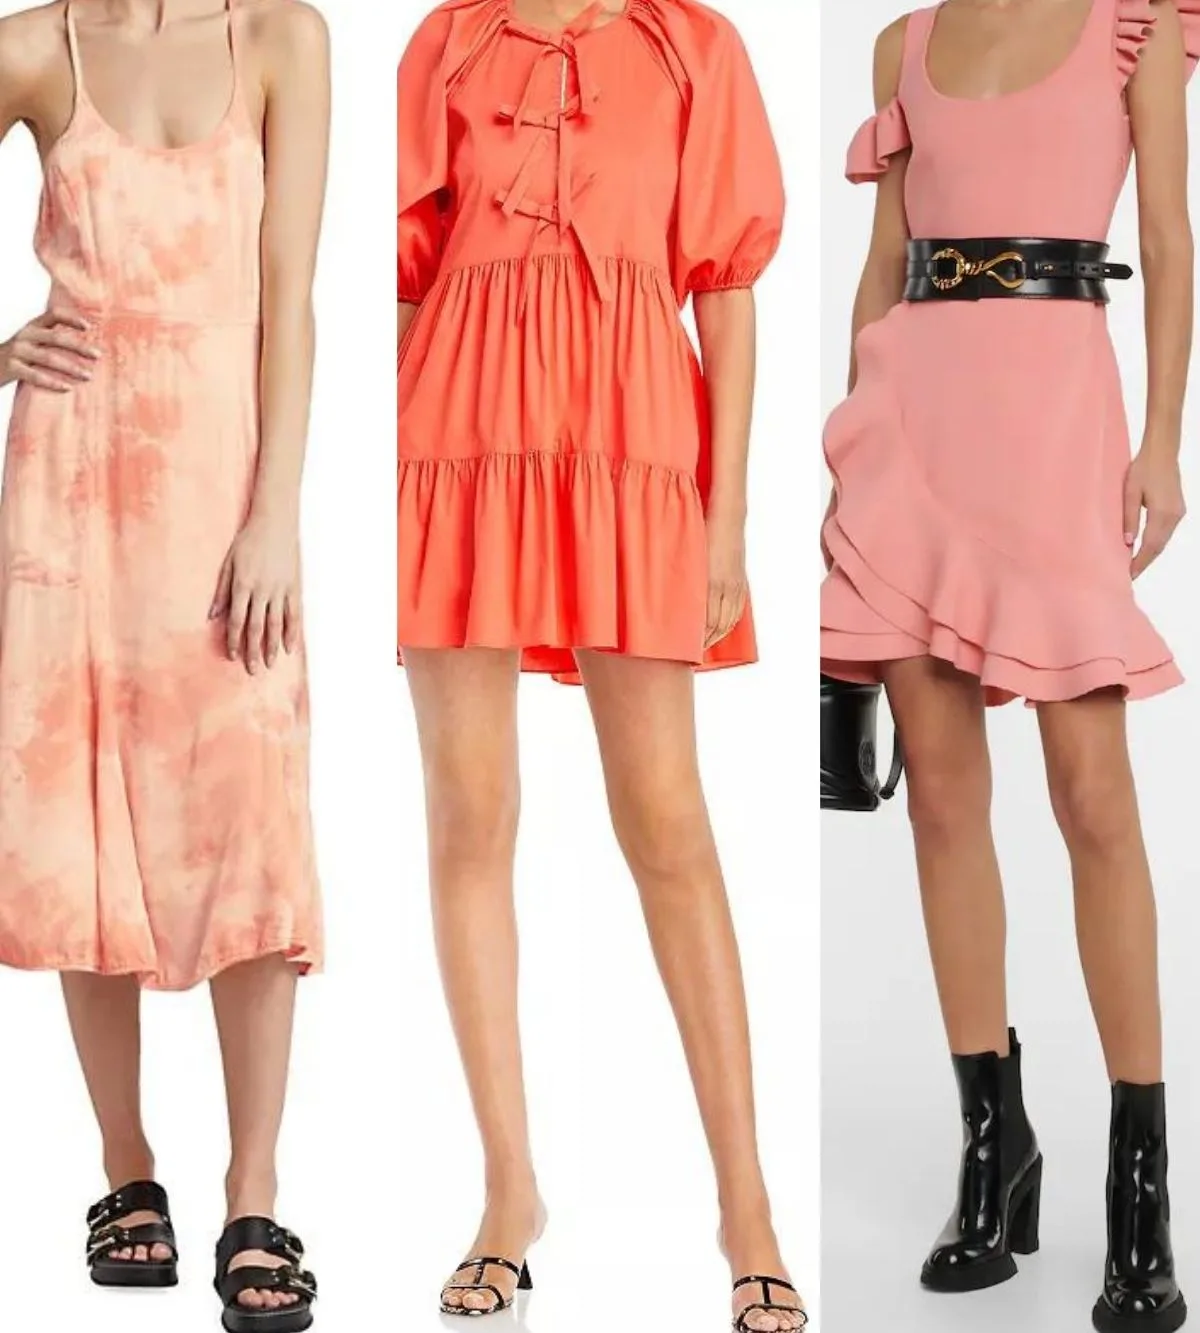 10 Best Color Shoes to go with Peach Dresses  Outfits  A Color Guide